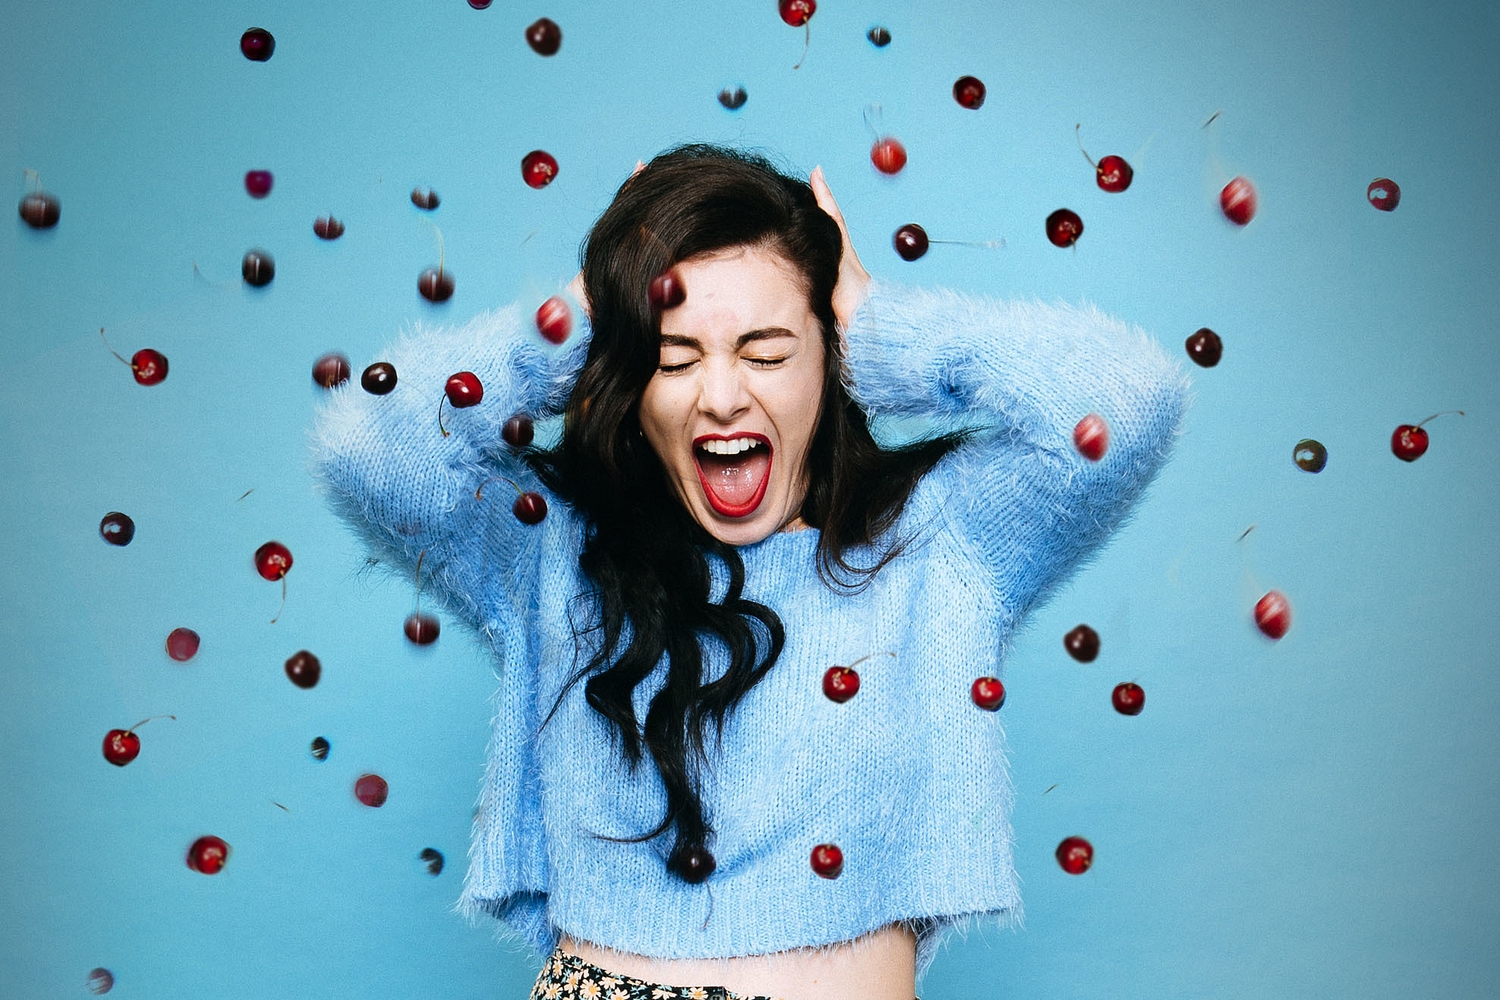 ​Charli XCX: “I feel like an ice cube floating around in a sea of chill”